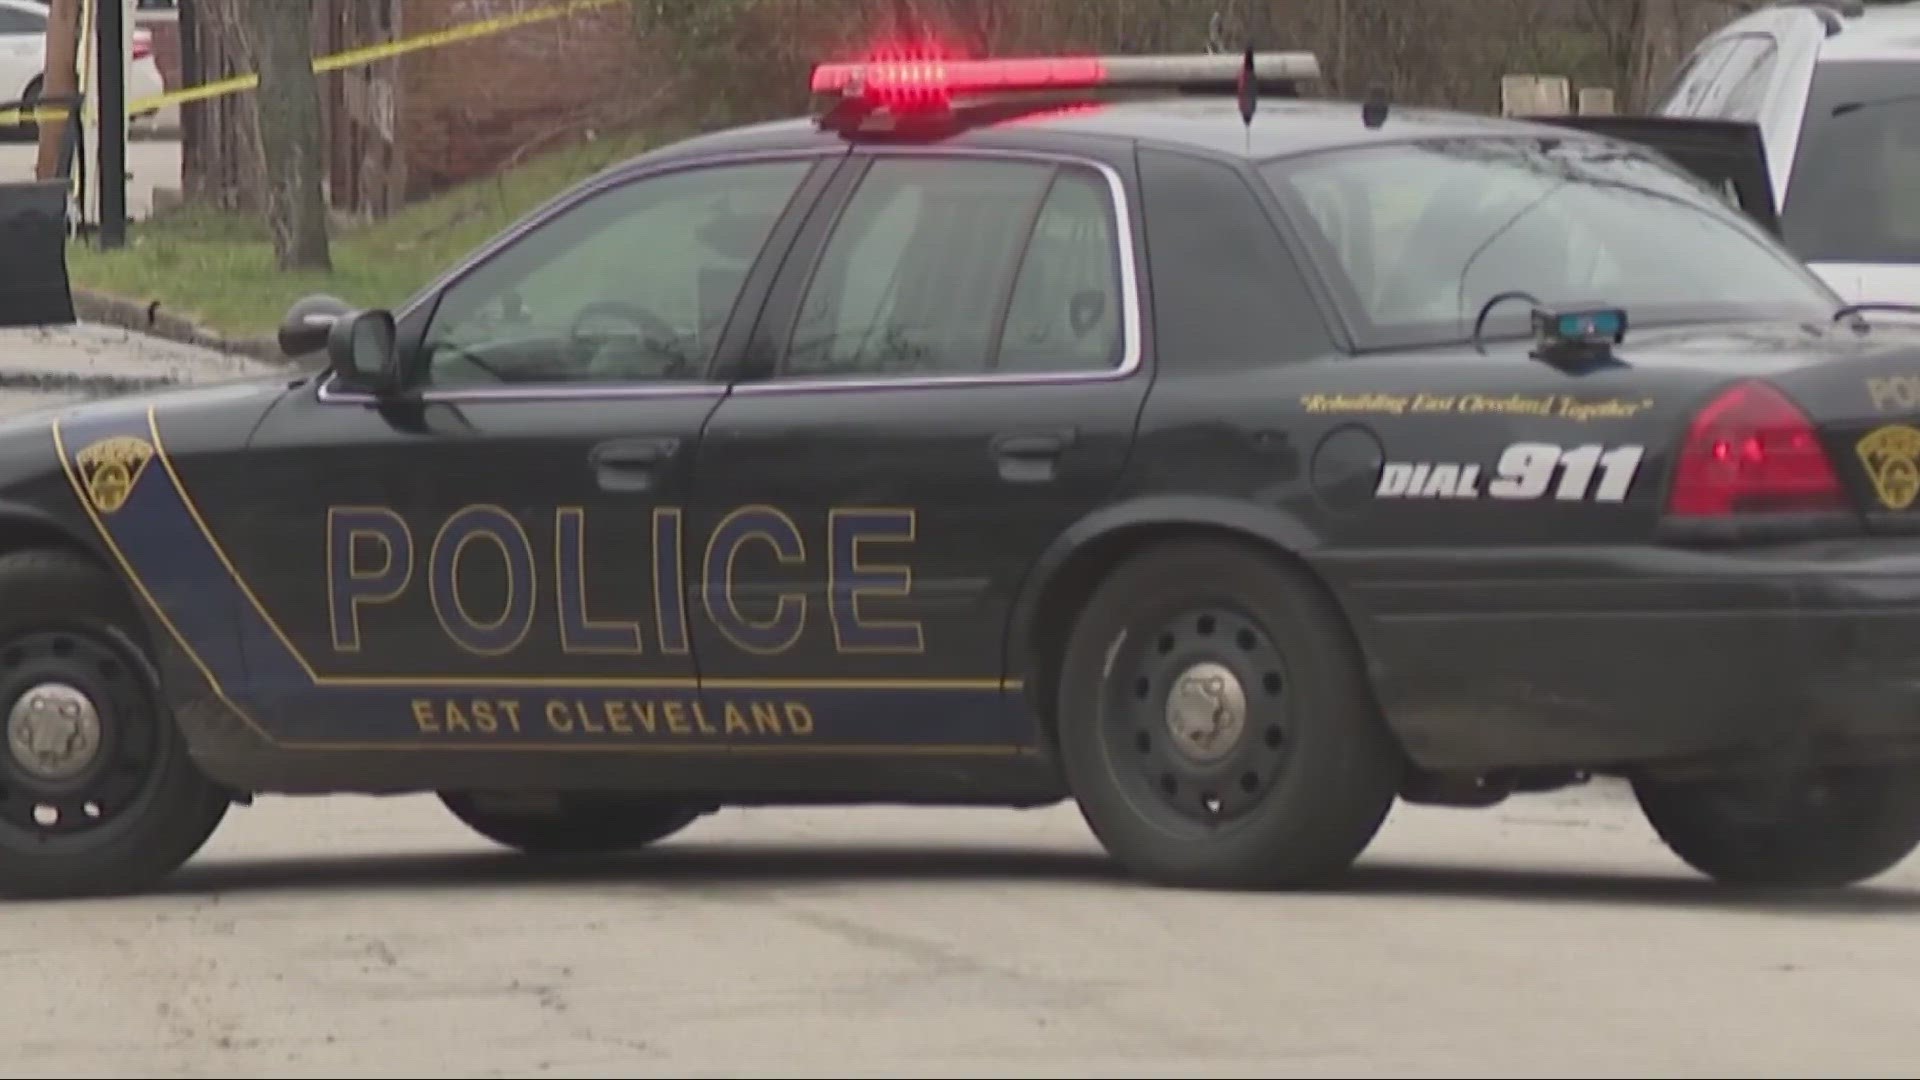 The request came shortly after 11 current and former East Cleveland police officers were indicted on criminal charges.